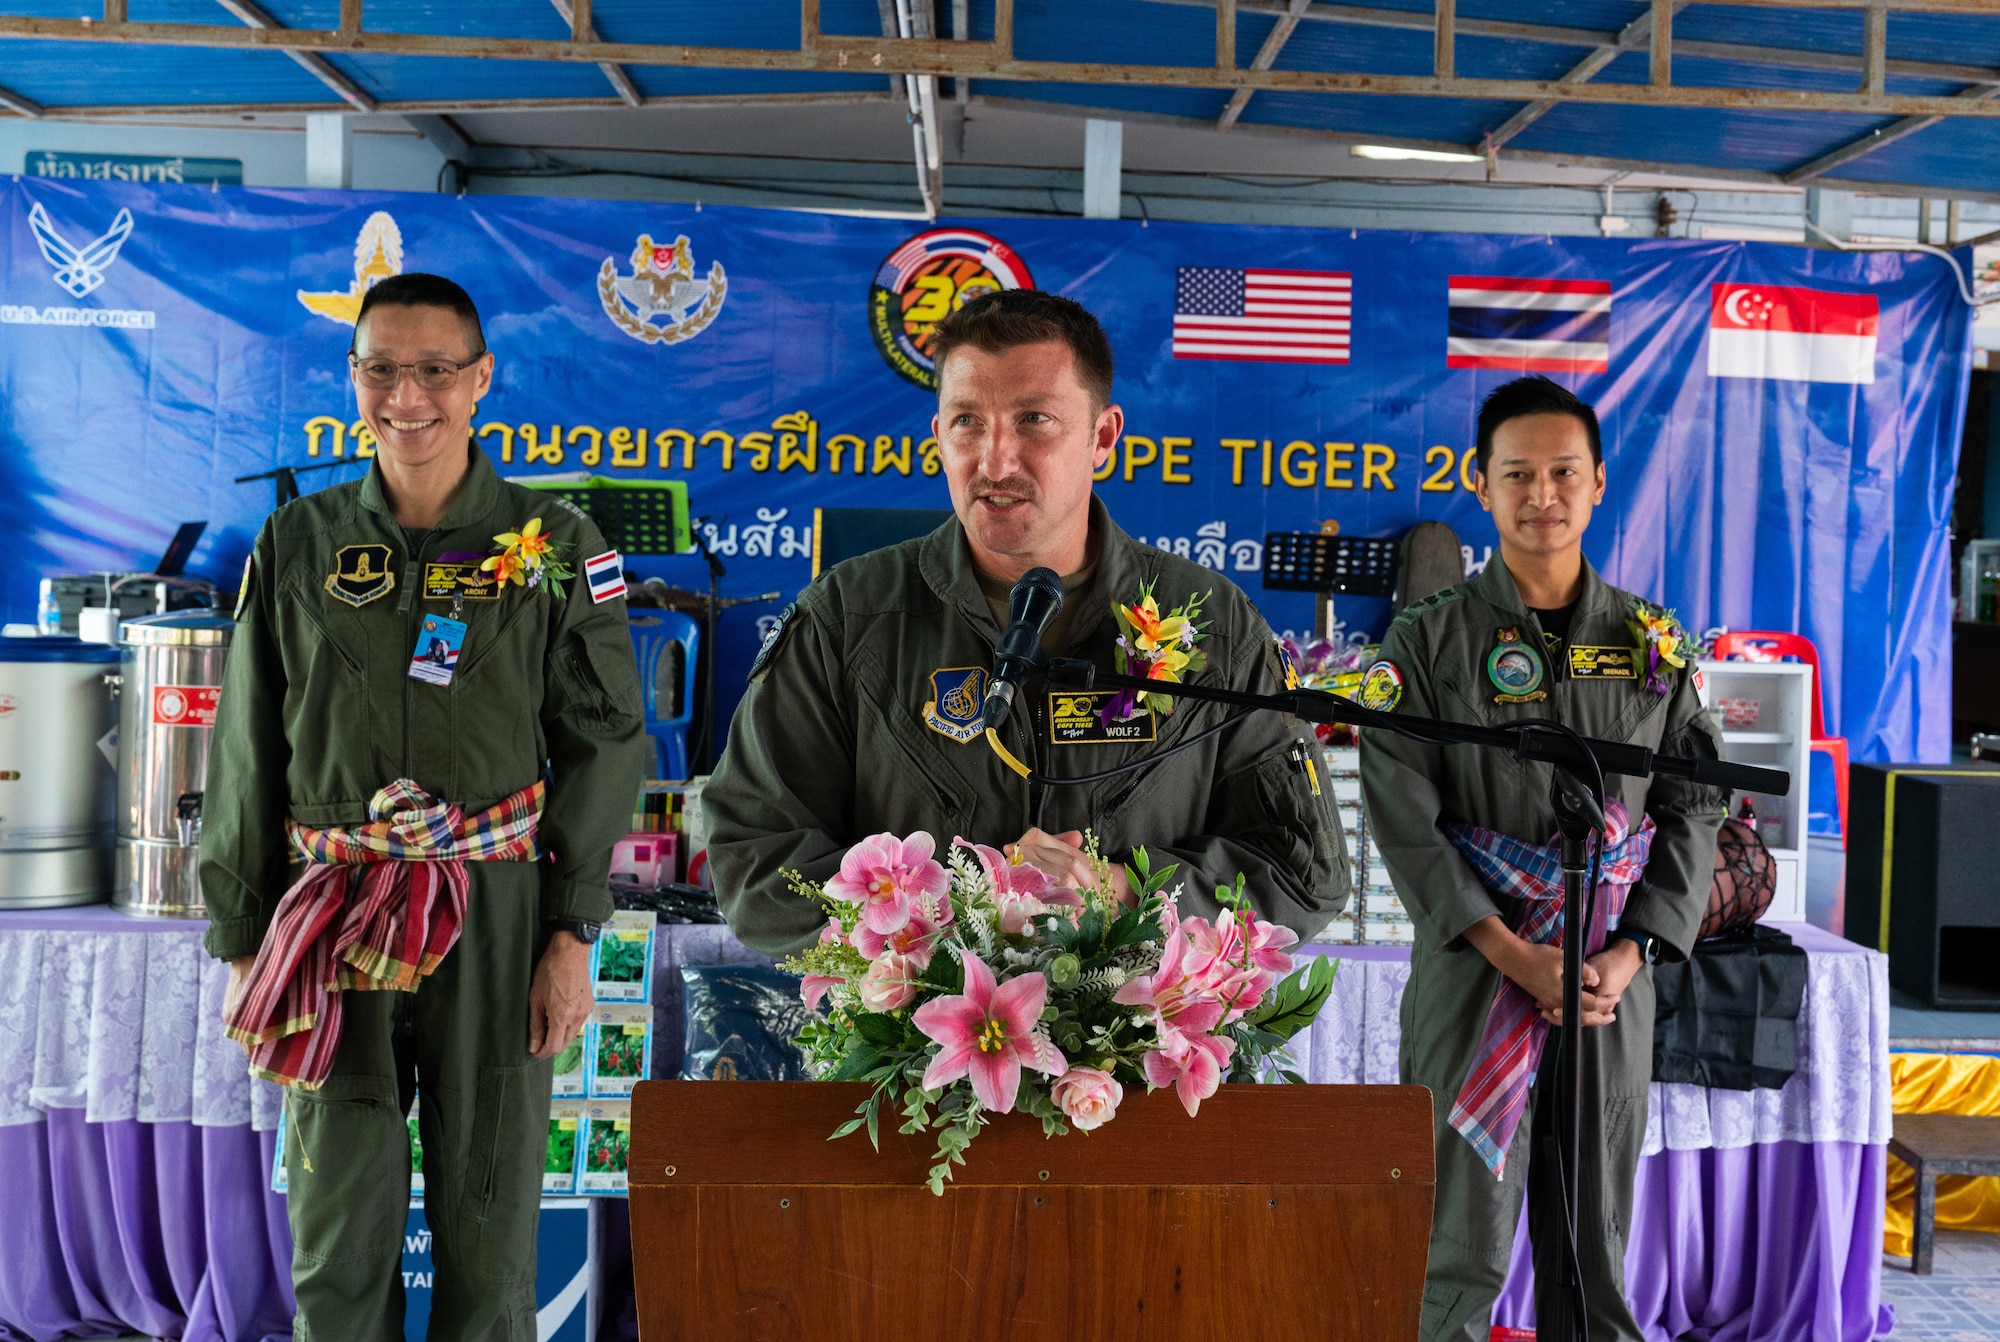 U.S. Air Force Col. Jeffrey Shulman, Cope Tiger 2024 exercise director, gives remarks at a ceremony during a community outreach event for Cope Tiger 2024, Ban Krok Duan Ha School, Nakhon Ratchasima Province, Thailand, March 21, 2024. After the ceremony, Shulman joined the exercise directors from the Royal Thai Air Force and Republic of Singapore Air Force in a ribbon cutting ceremony for a new facility on the school campus, planted seeds in the garden, toured the school and served lunch to the students. (U.S. Air Force photo by Tech. Sgt. Hailey Haux)